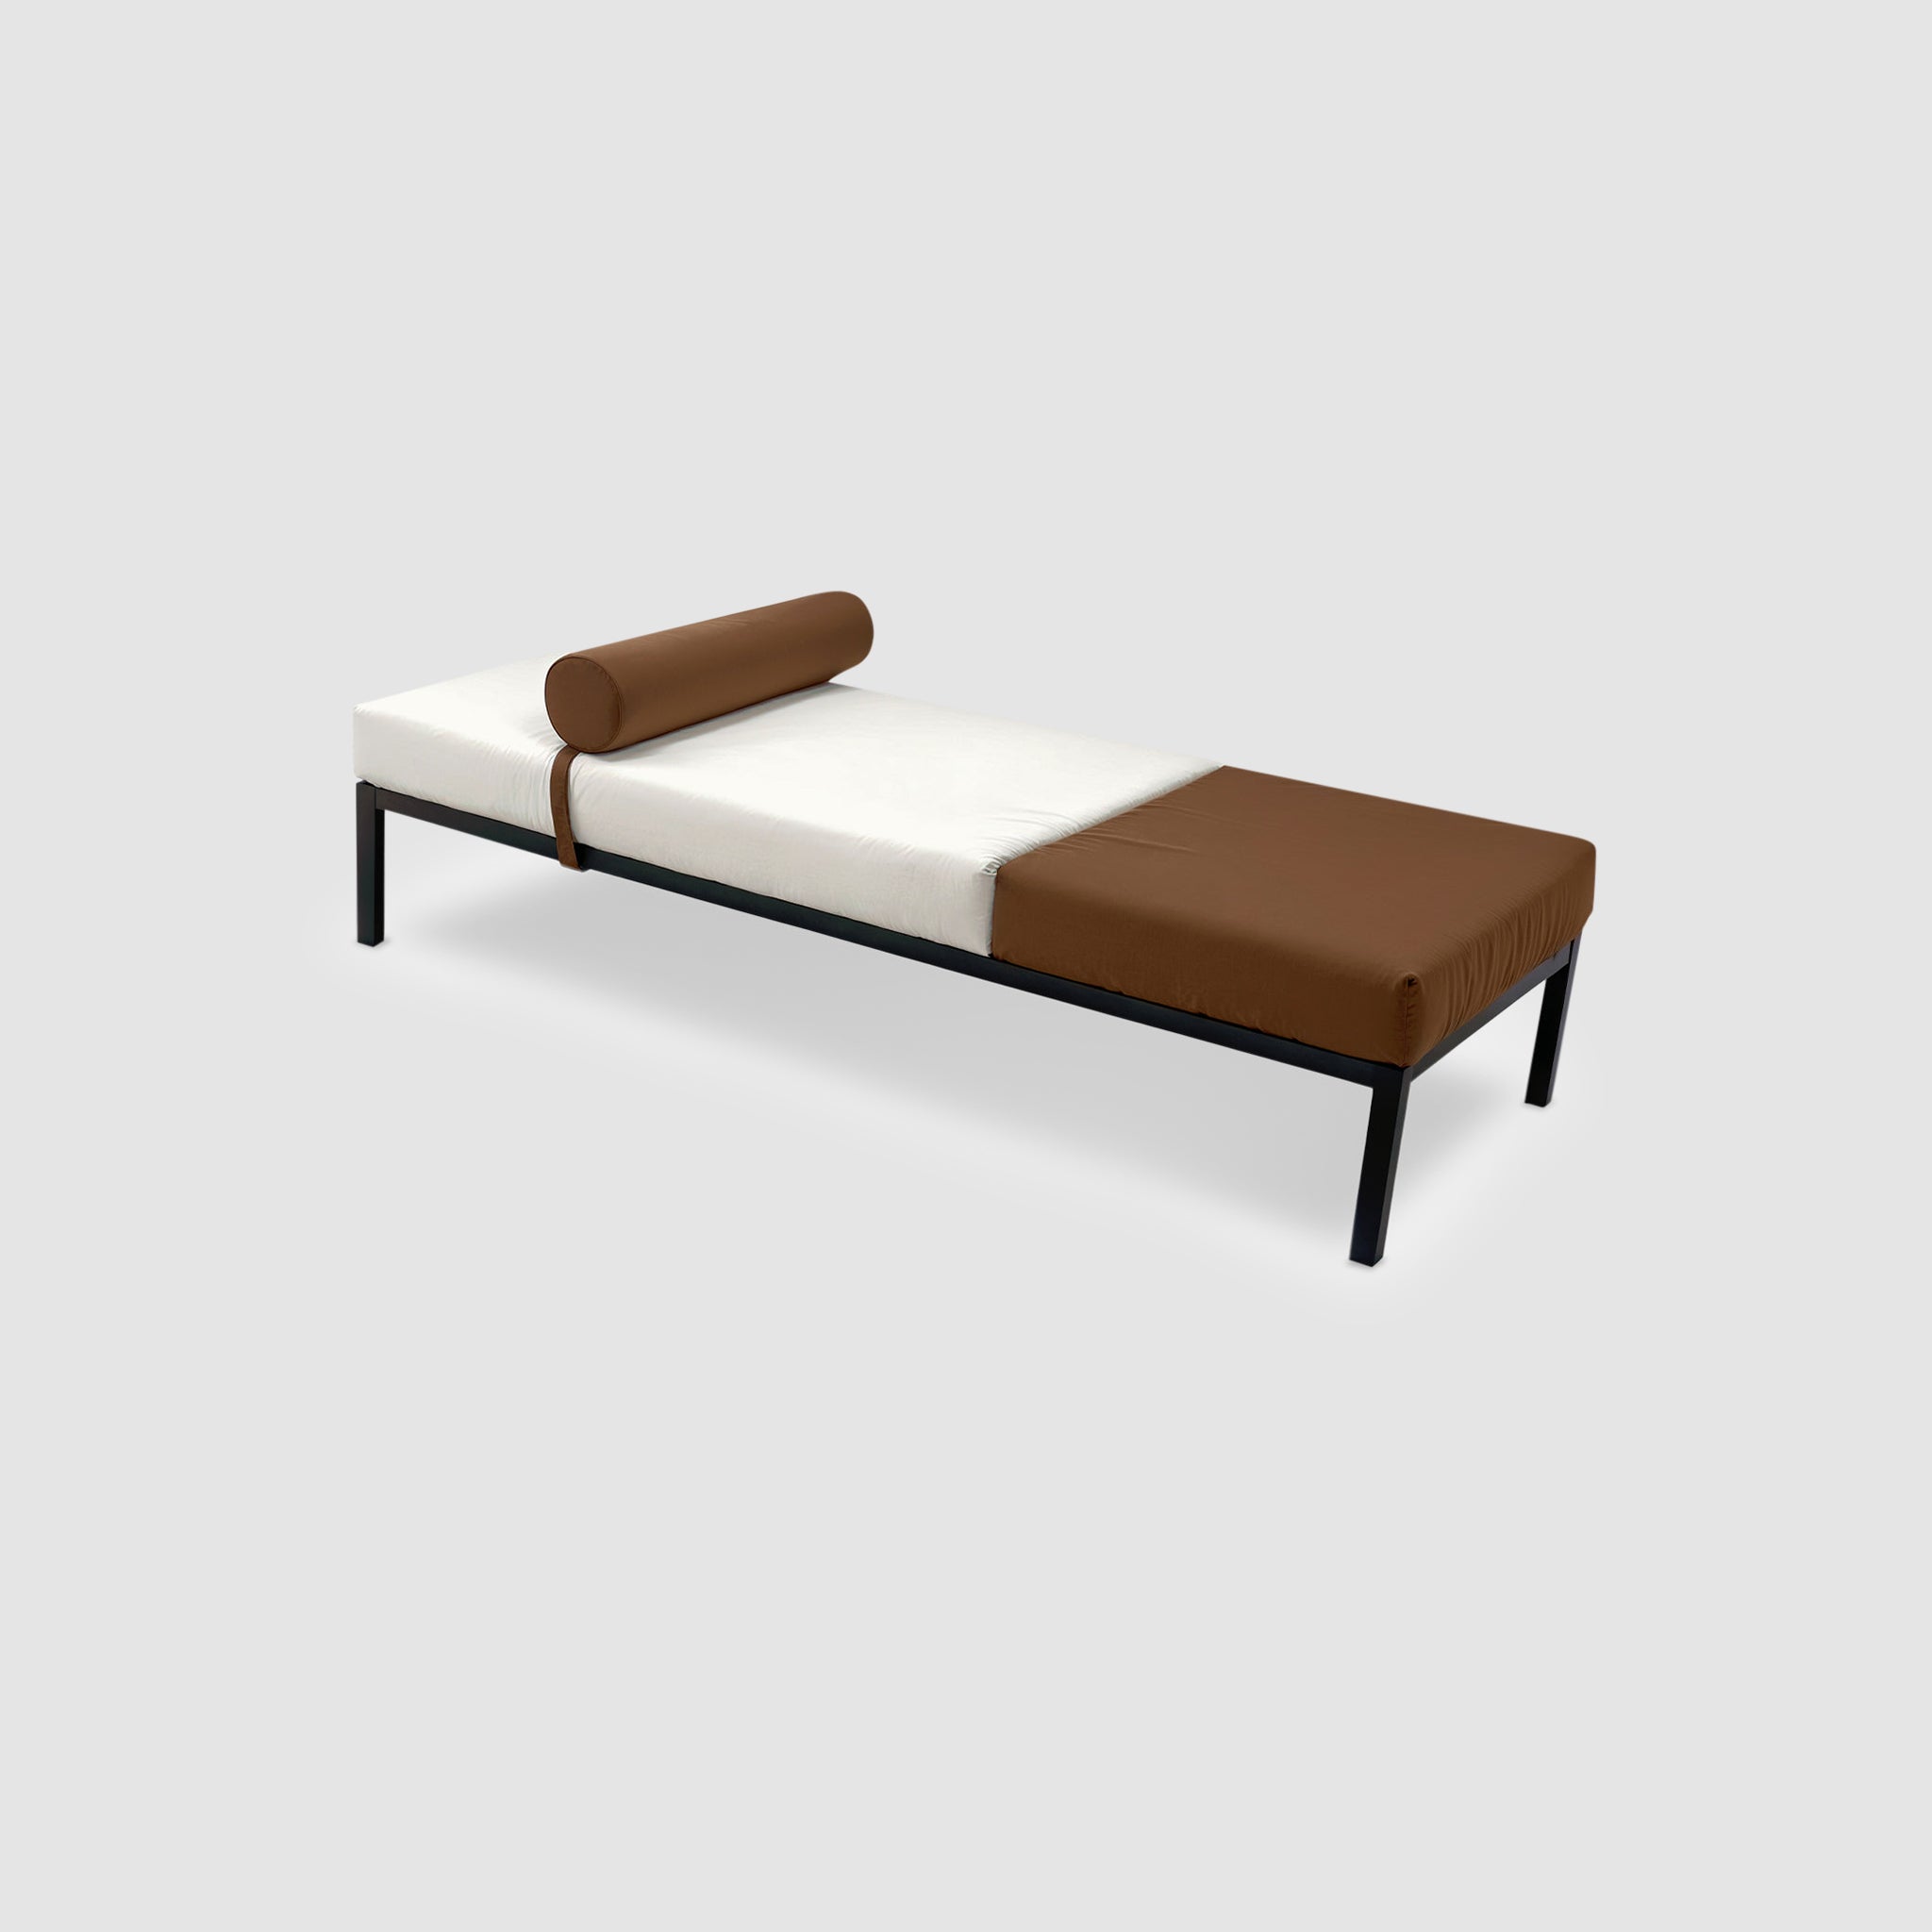 The Rodman Day Bed, featuring a classic midcentury design with a powder-coated steel frame, low seating, and minimalist appeal. The two-tone upholstery includes signature Vegan Leather and customizable fabric options. The bolster cushion is also in Vegan Leather and attaches with Velcro.